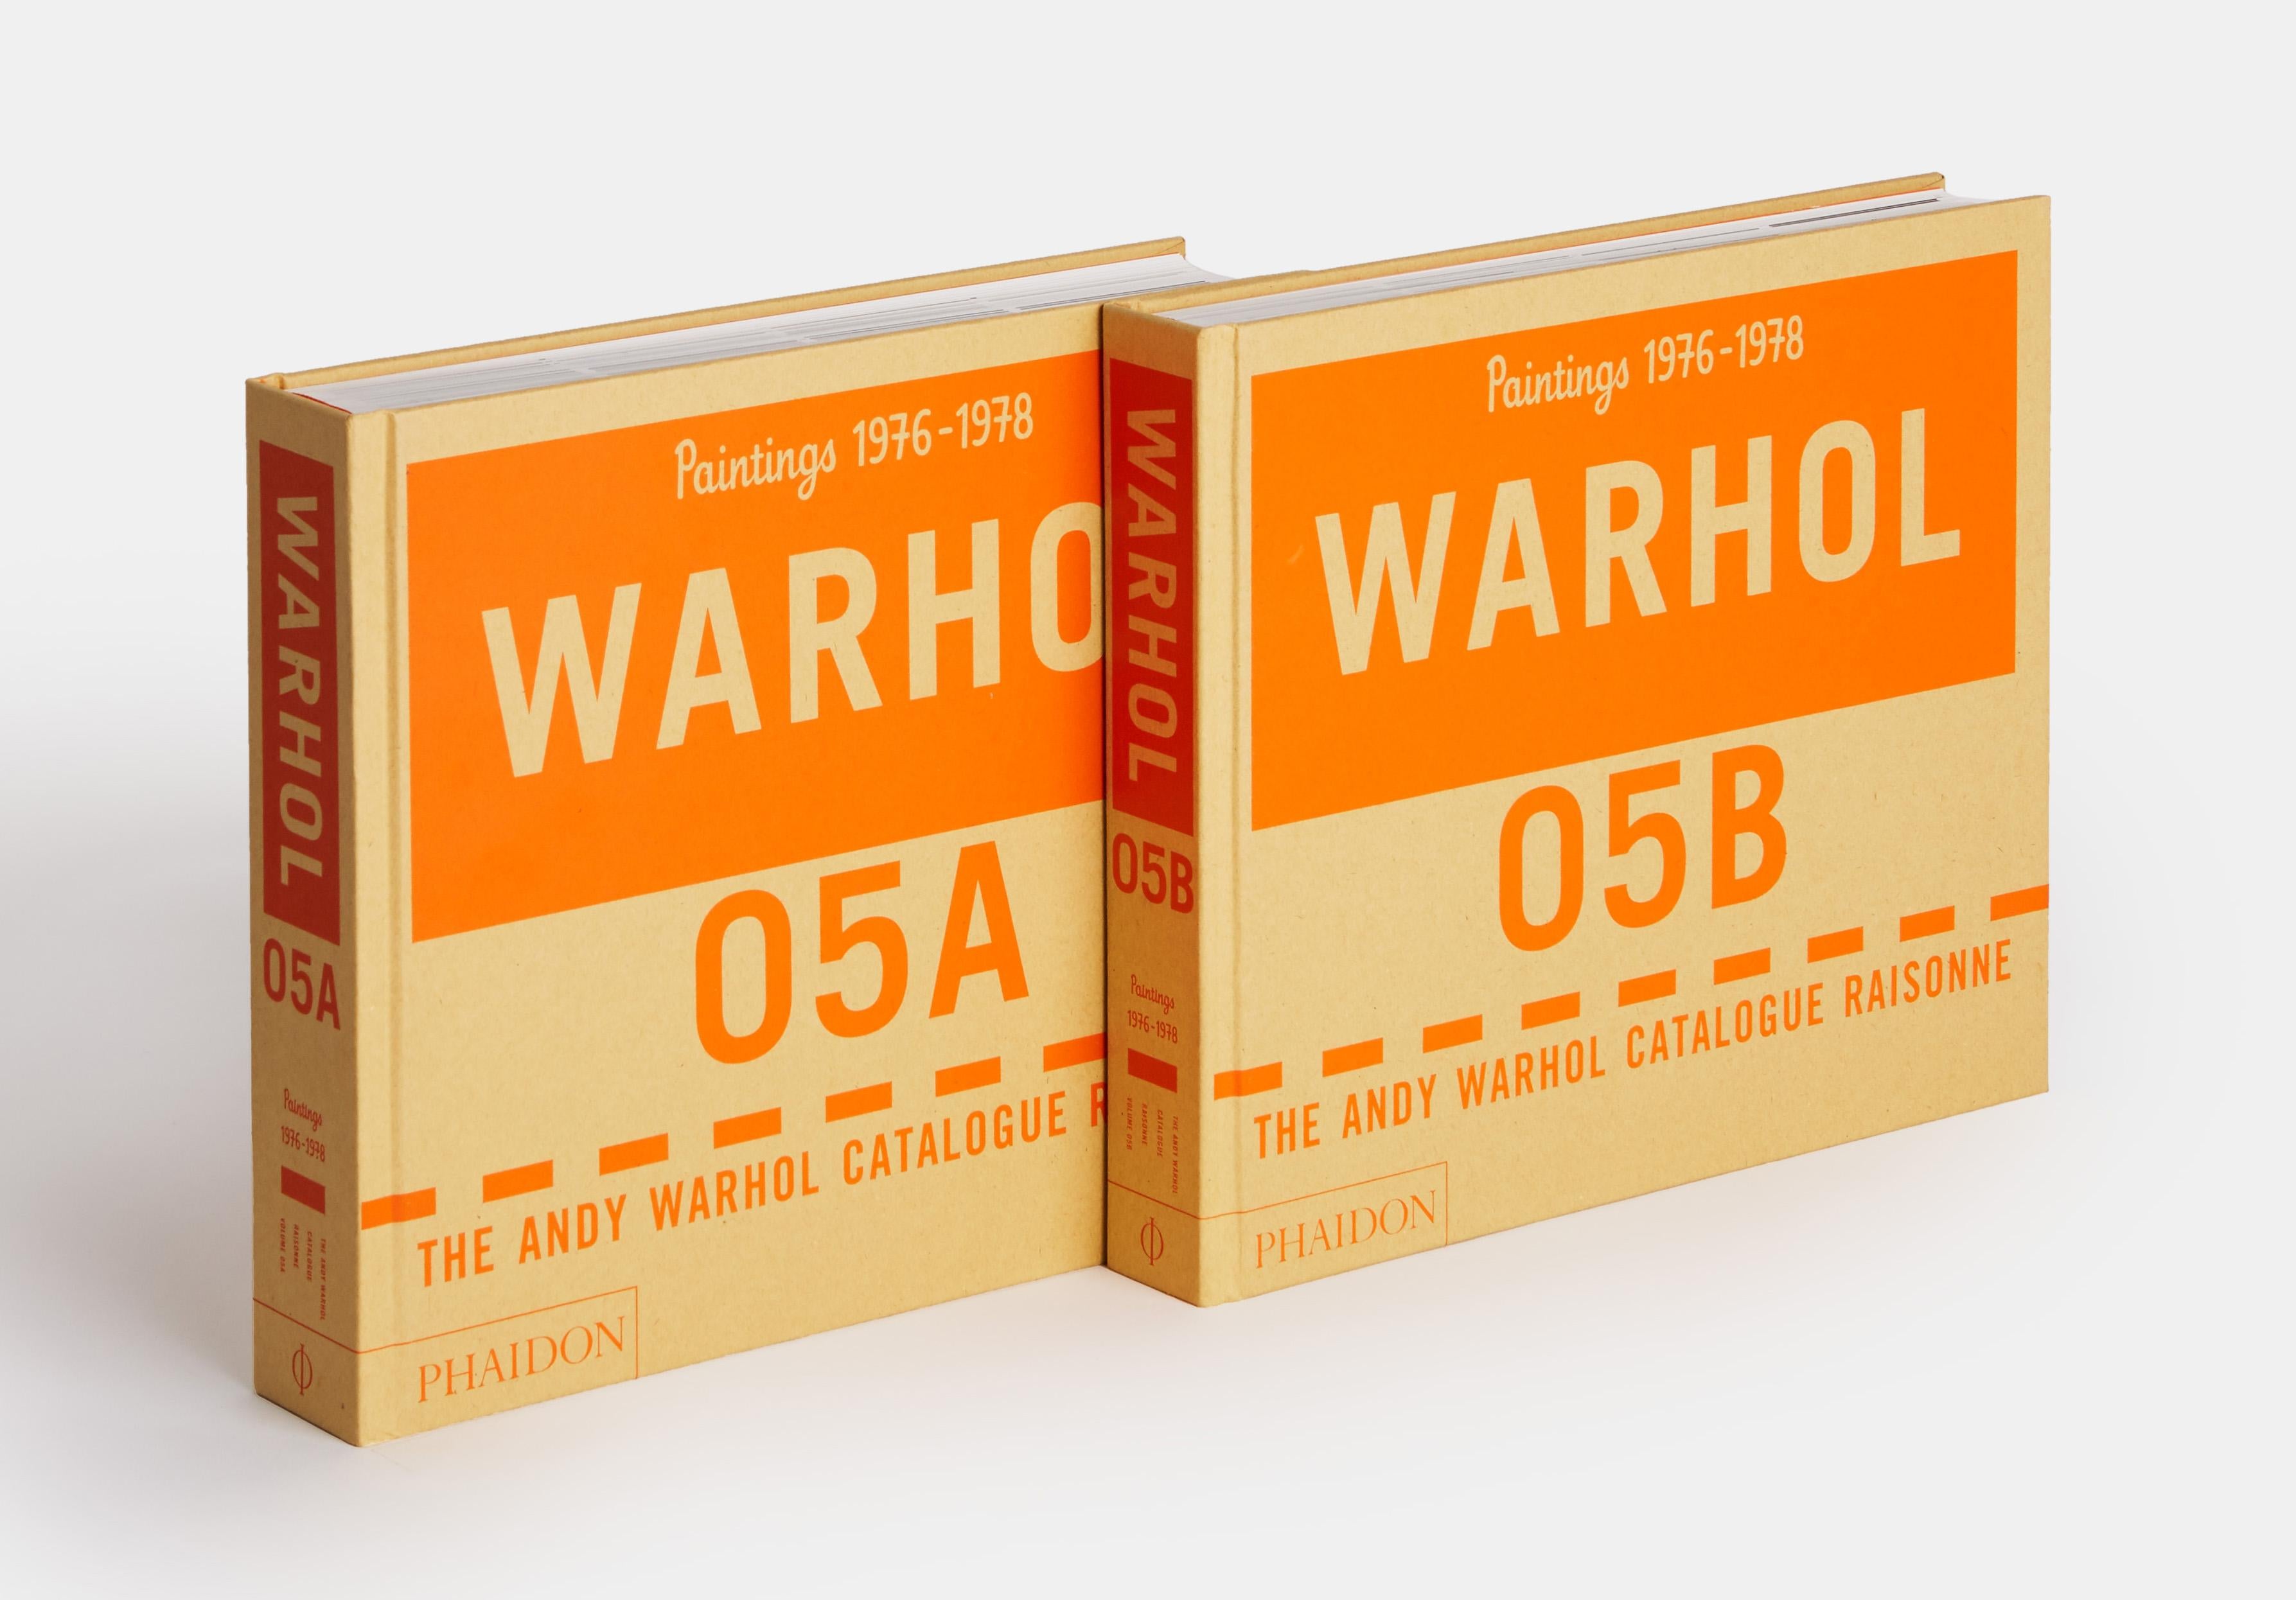 The highly anticipated fifth volume of The Andy Warhol Catalogue Raisonné, covering his paintings from 1976 to 1978
This two-book addition to The Andy Warhol Catalogue Raisonné persuasively demonstrates the subversive core of Warhol's art. Intent